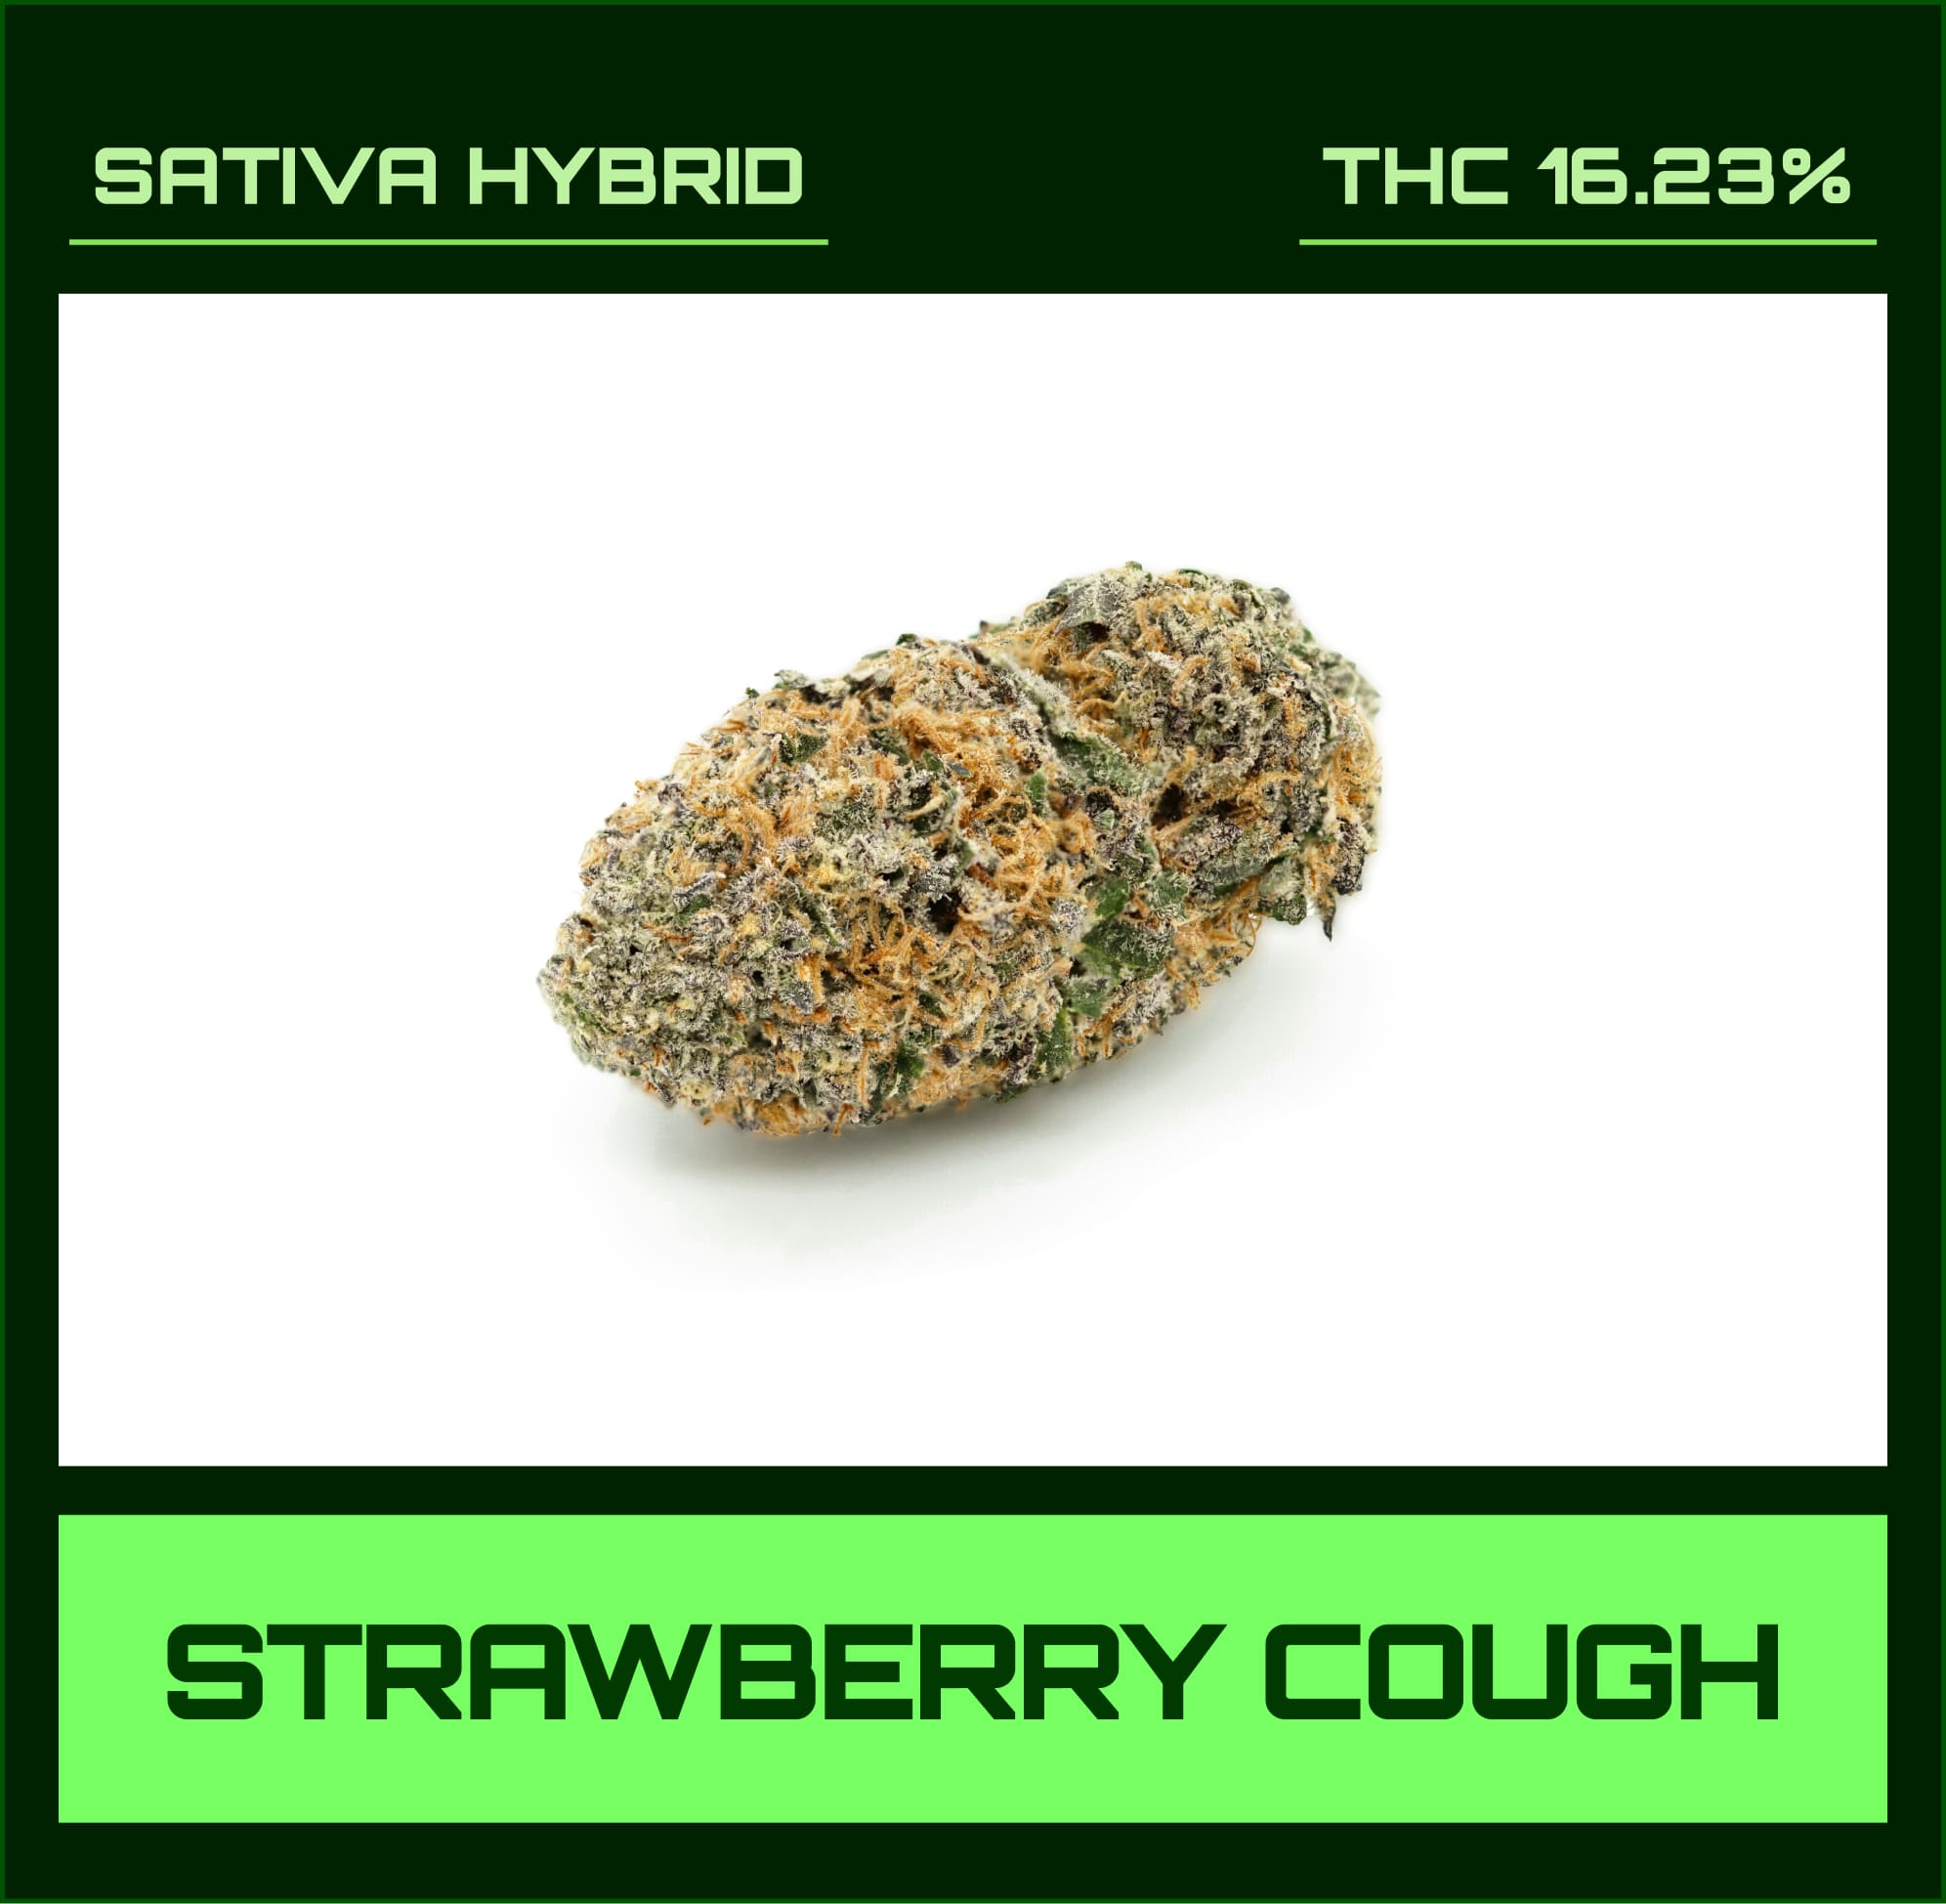 Strawberry cough